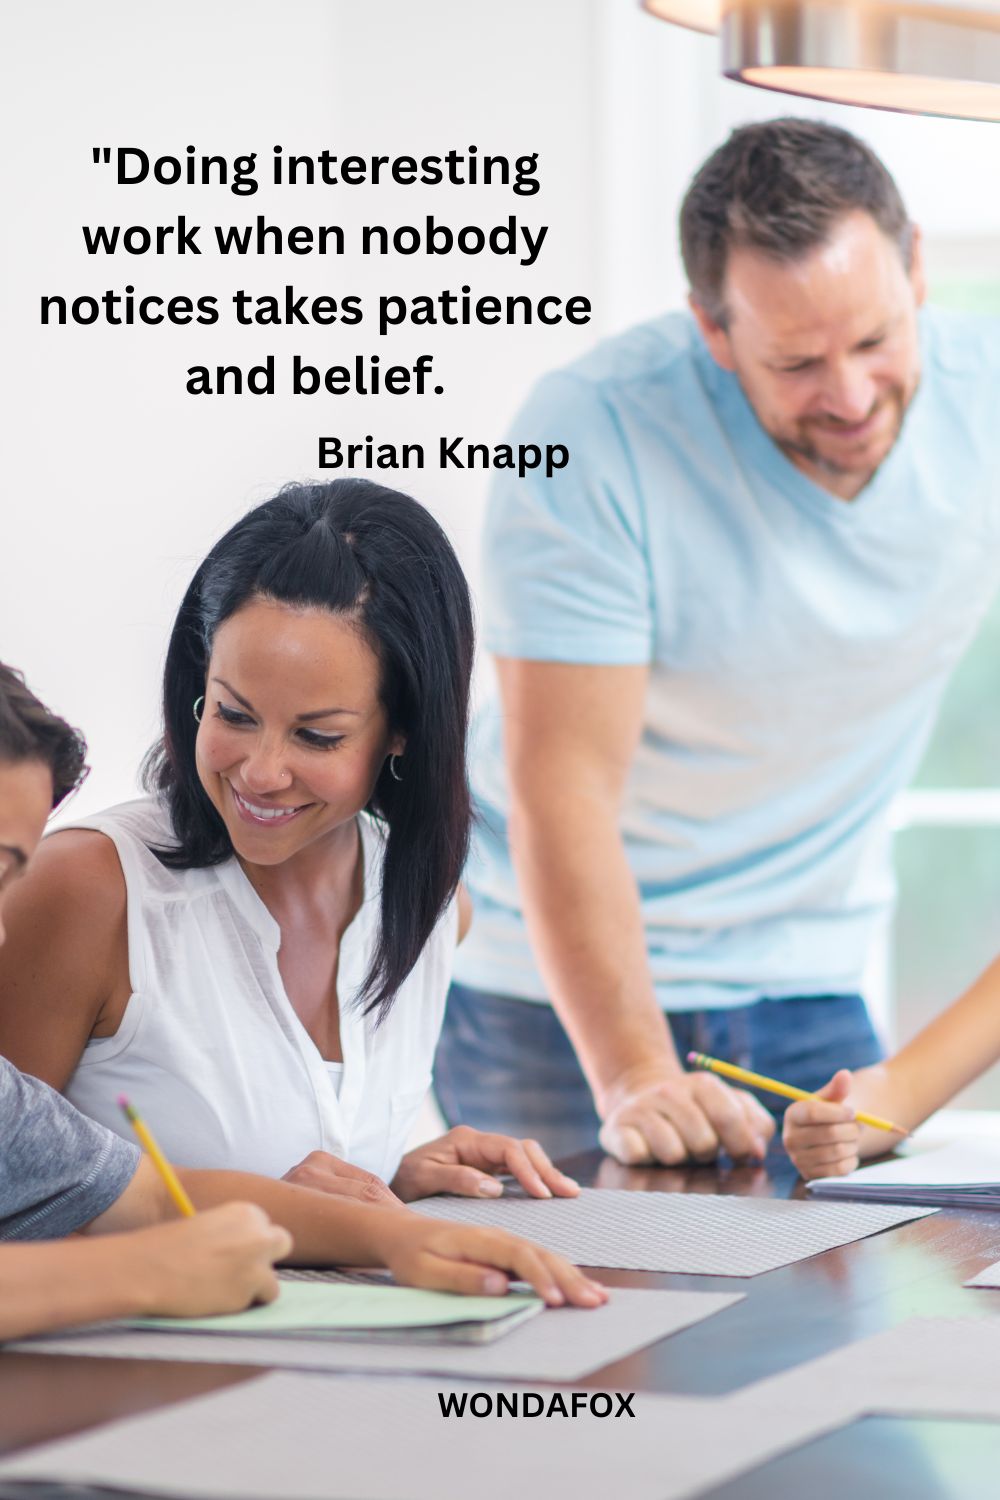 "Doing interesting work when nobody notices takes patience and belief.
Brian Knapp